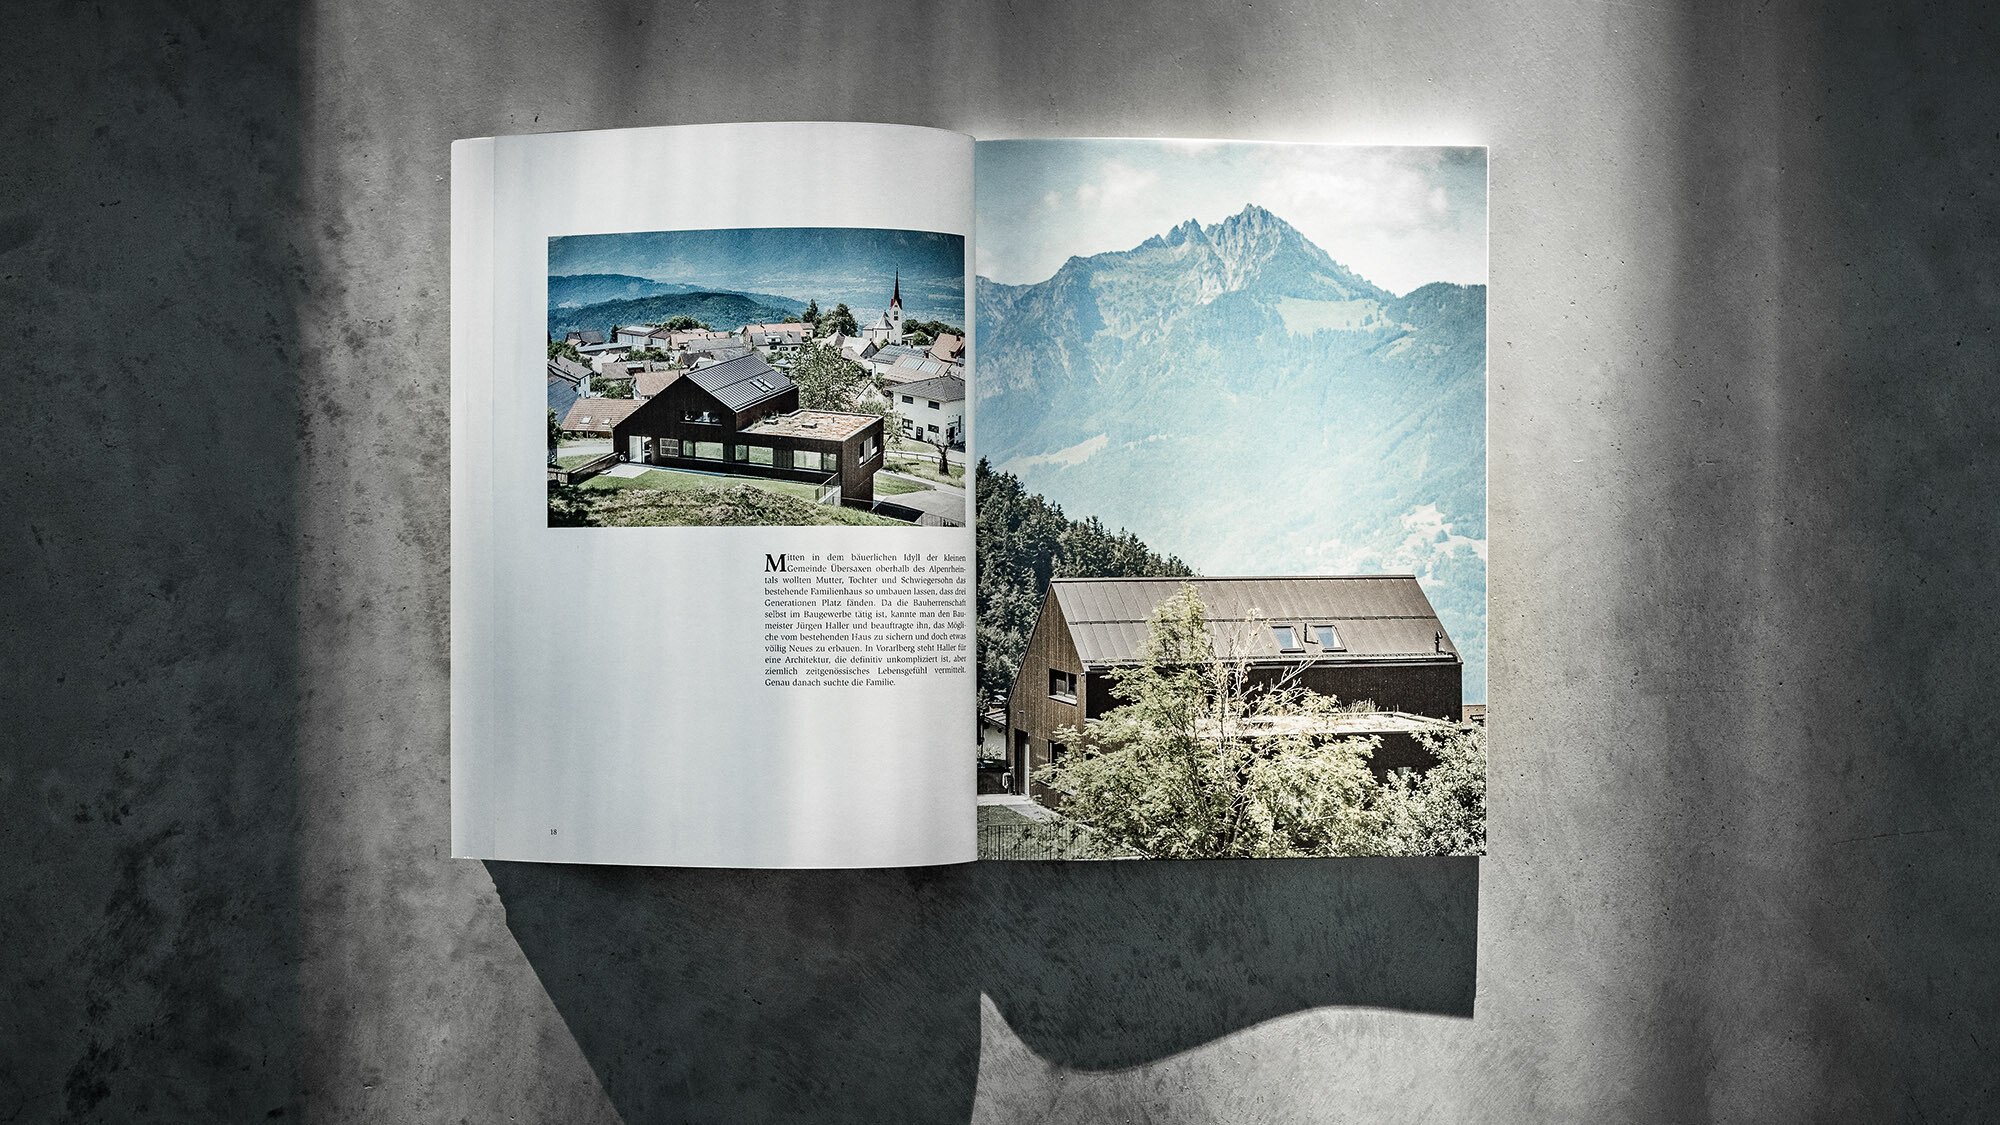 The open PREFARENZEN book 2024 with an article on the multi-family house Matino by Jürgen Haller before a grey background.